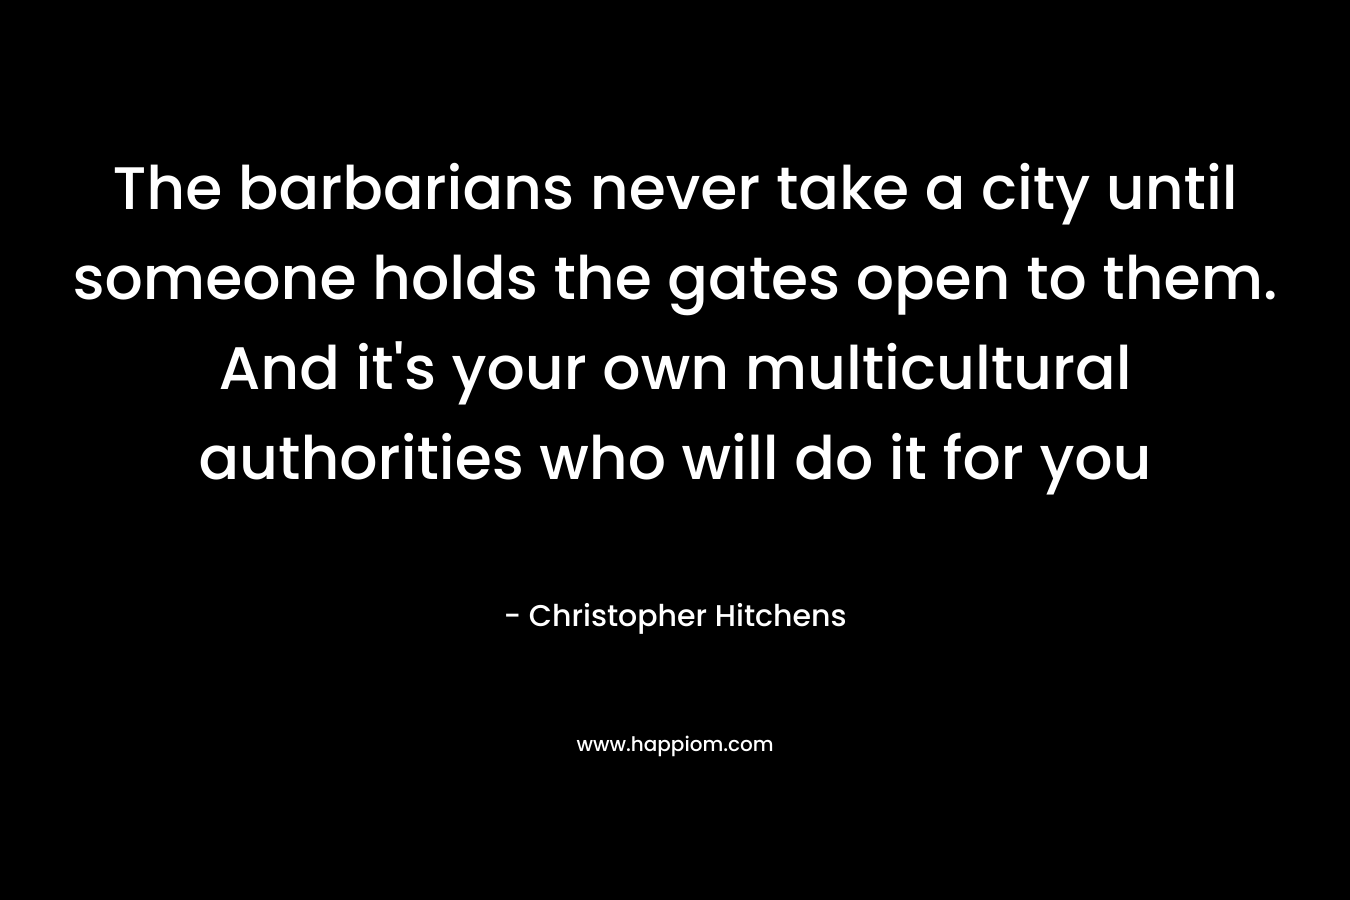 The barbarians never take a city until someone holds the gates open to them. And it’s your own multicultural authorities who will do it for you – Christopher Hitchens